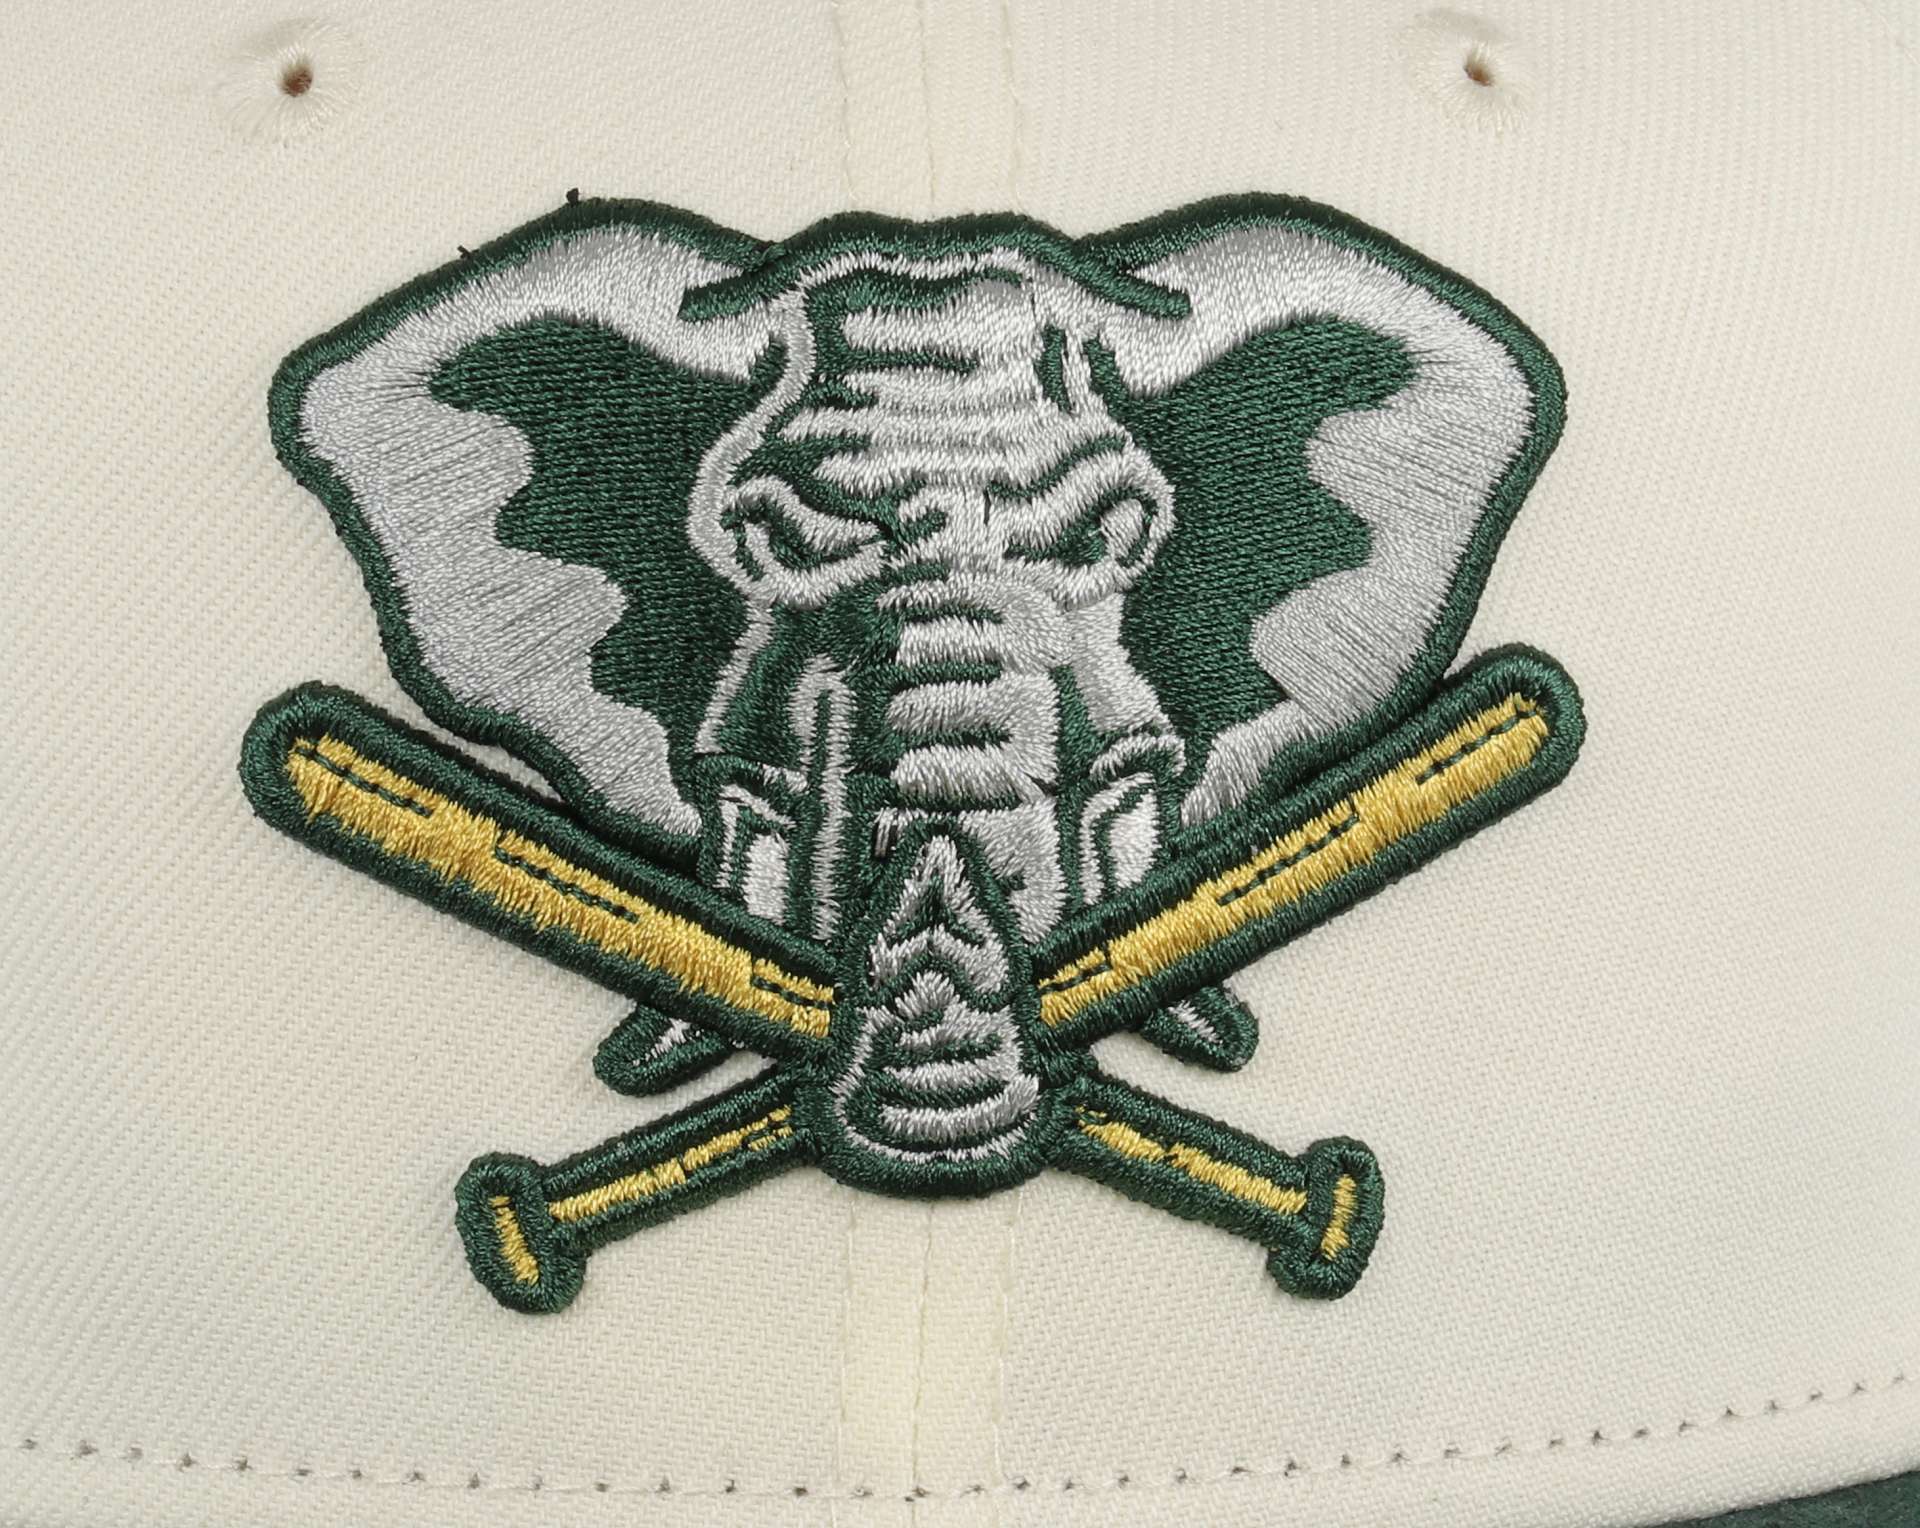 Oakland Athletics MLB Cooperstown 40th AnniversarySidepatch Chrome 59Fifty Basecap New Era